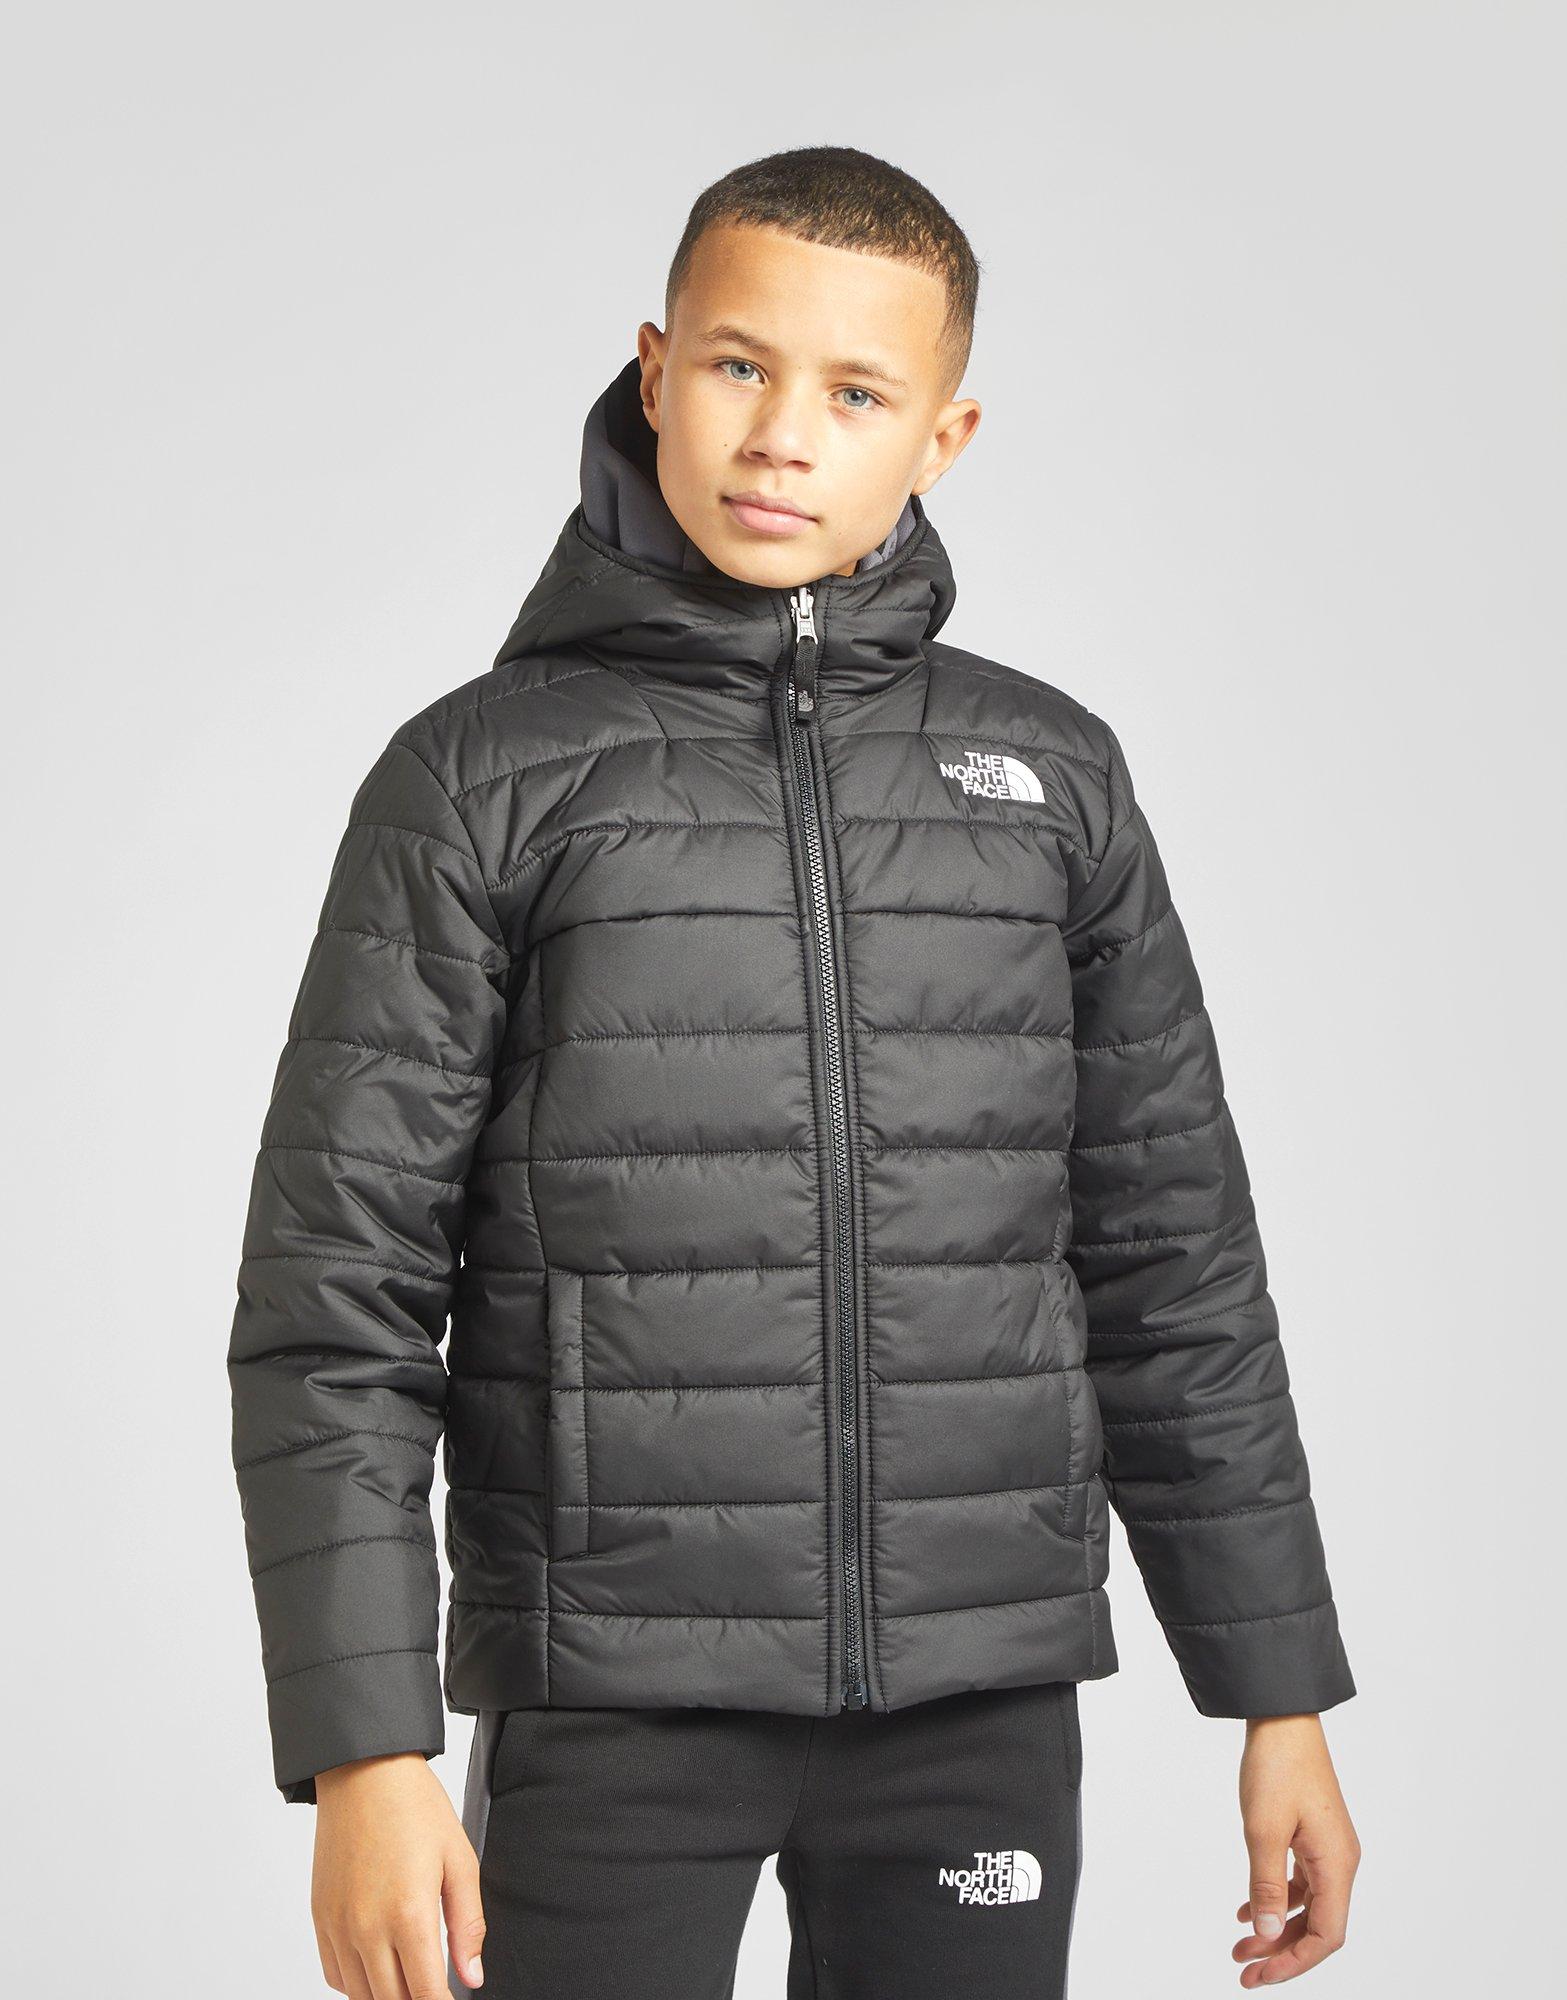 the north face perrito reversible jacket